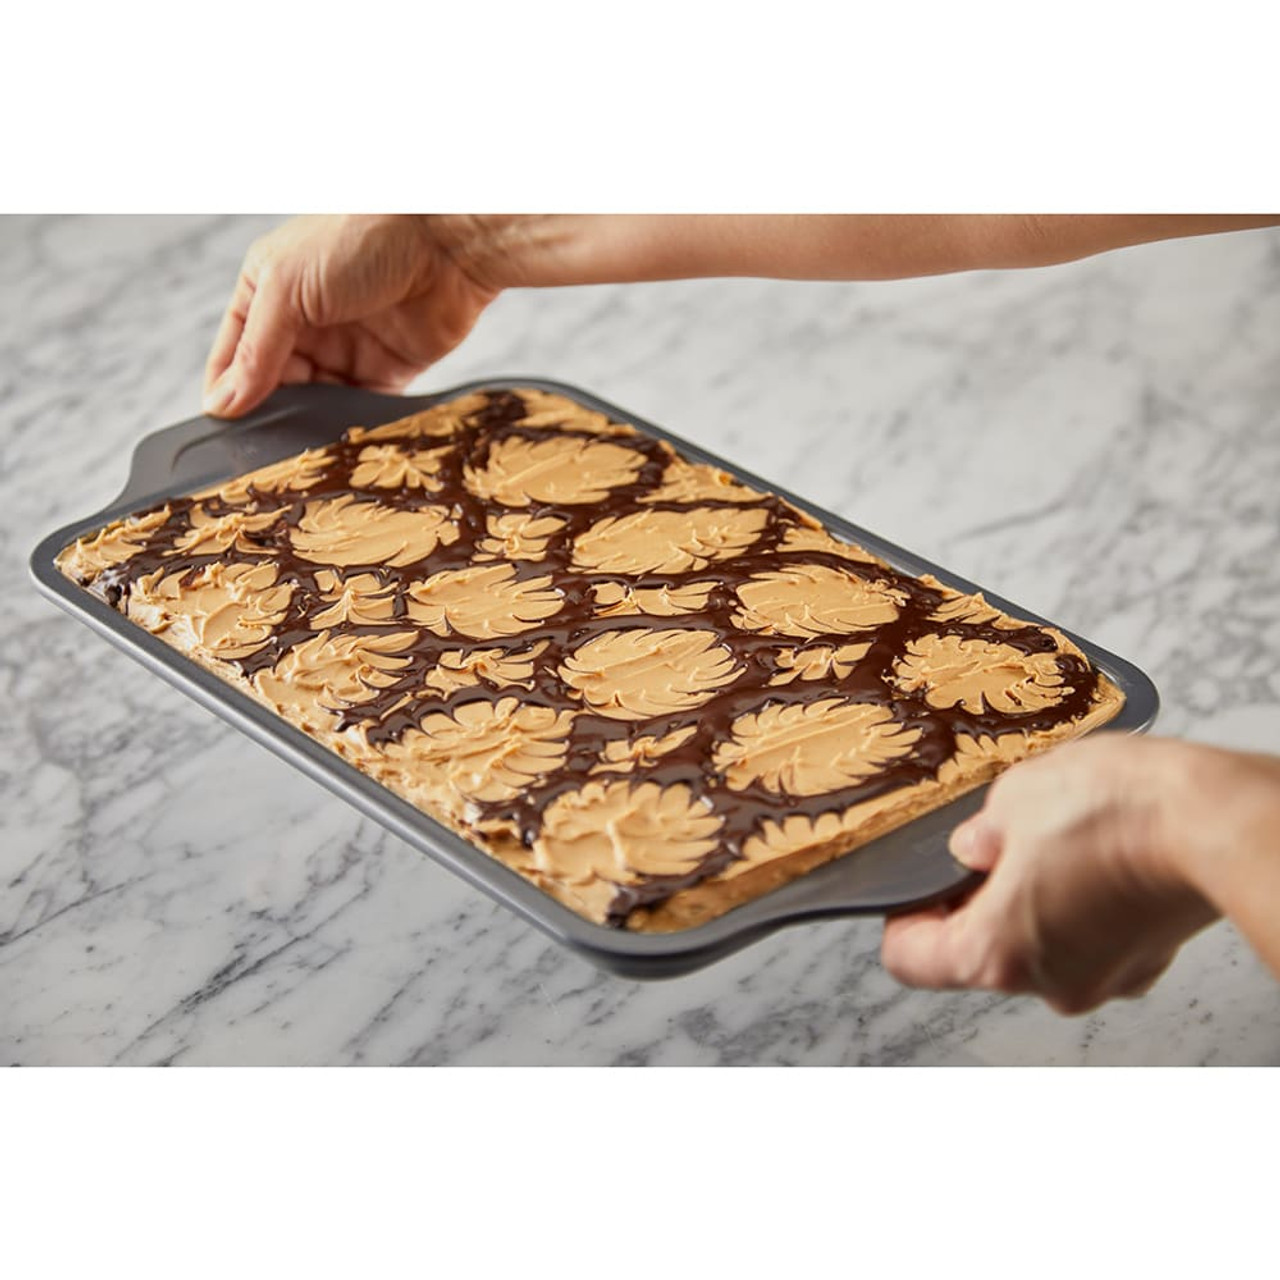 https://cdn11.bigcommerce.com/s-hccytny0od/images/stencil/1280x1280/products/3279/11732/all-clad-pro-release-quarter-sheet-pan-3__21680.1589499598.jpg?c=2?imbypass=on